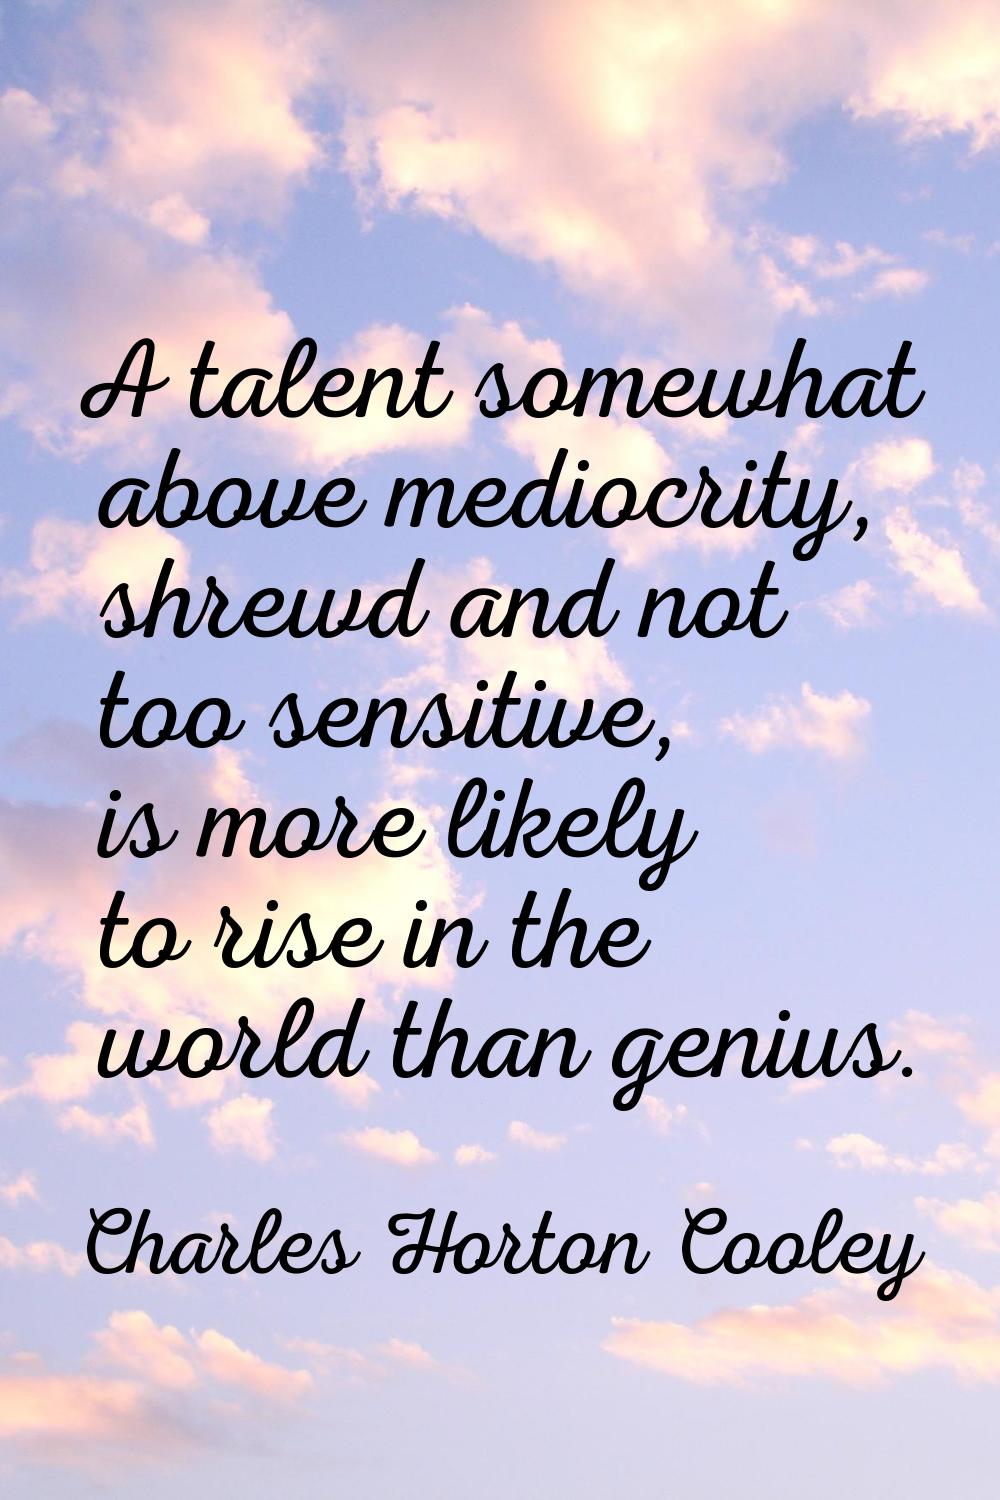 A talent somewhat above mediocrity, shrewd and not too sensitive, is more likely to rise in the wor